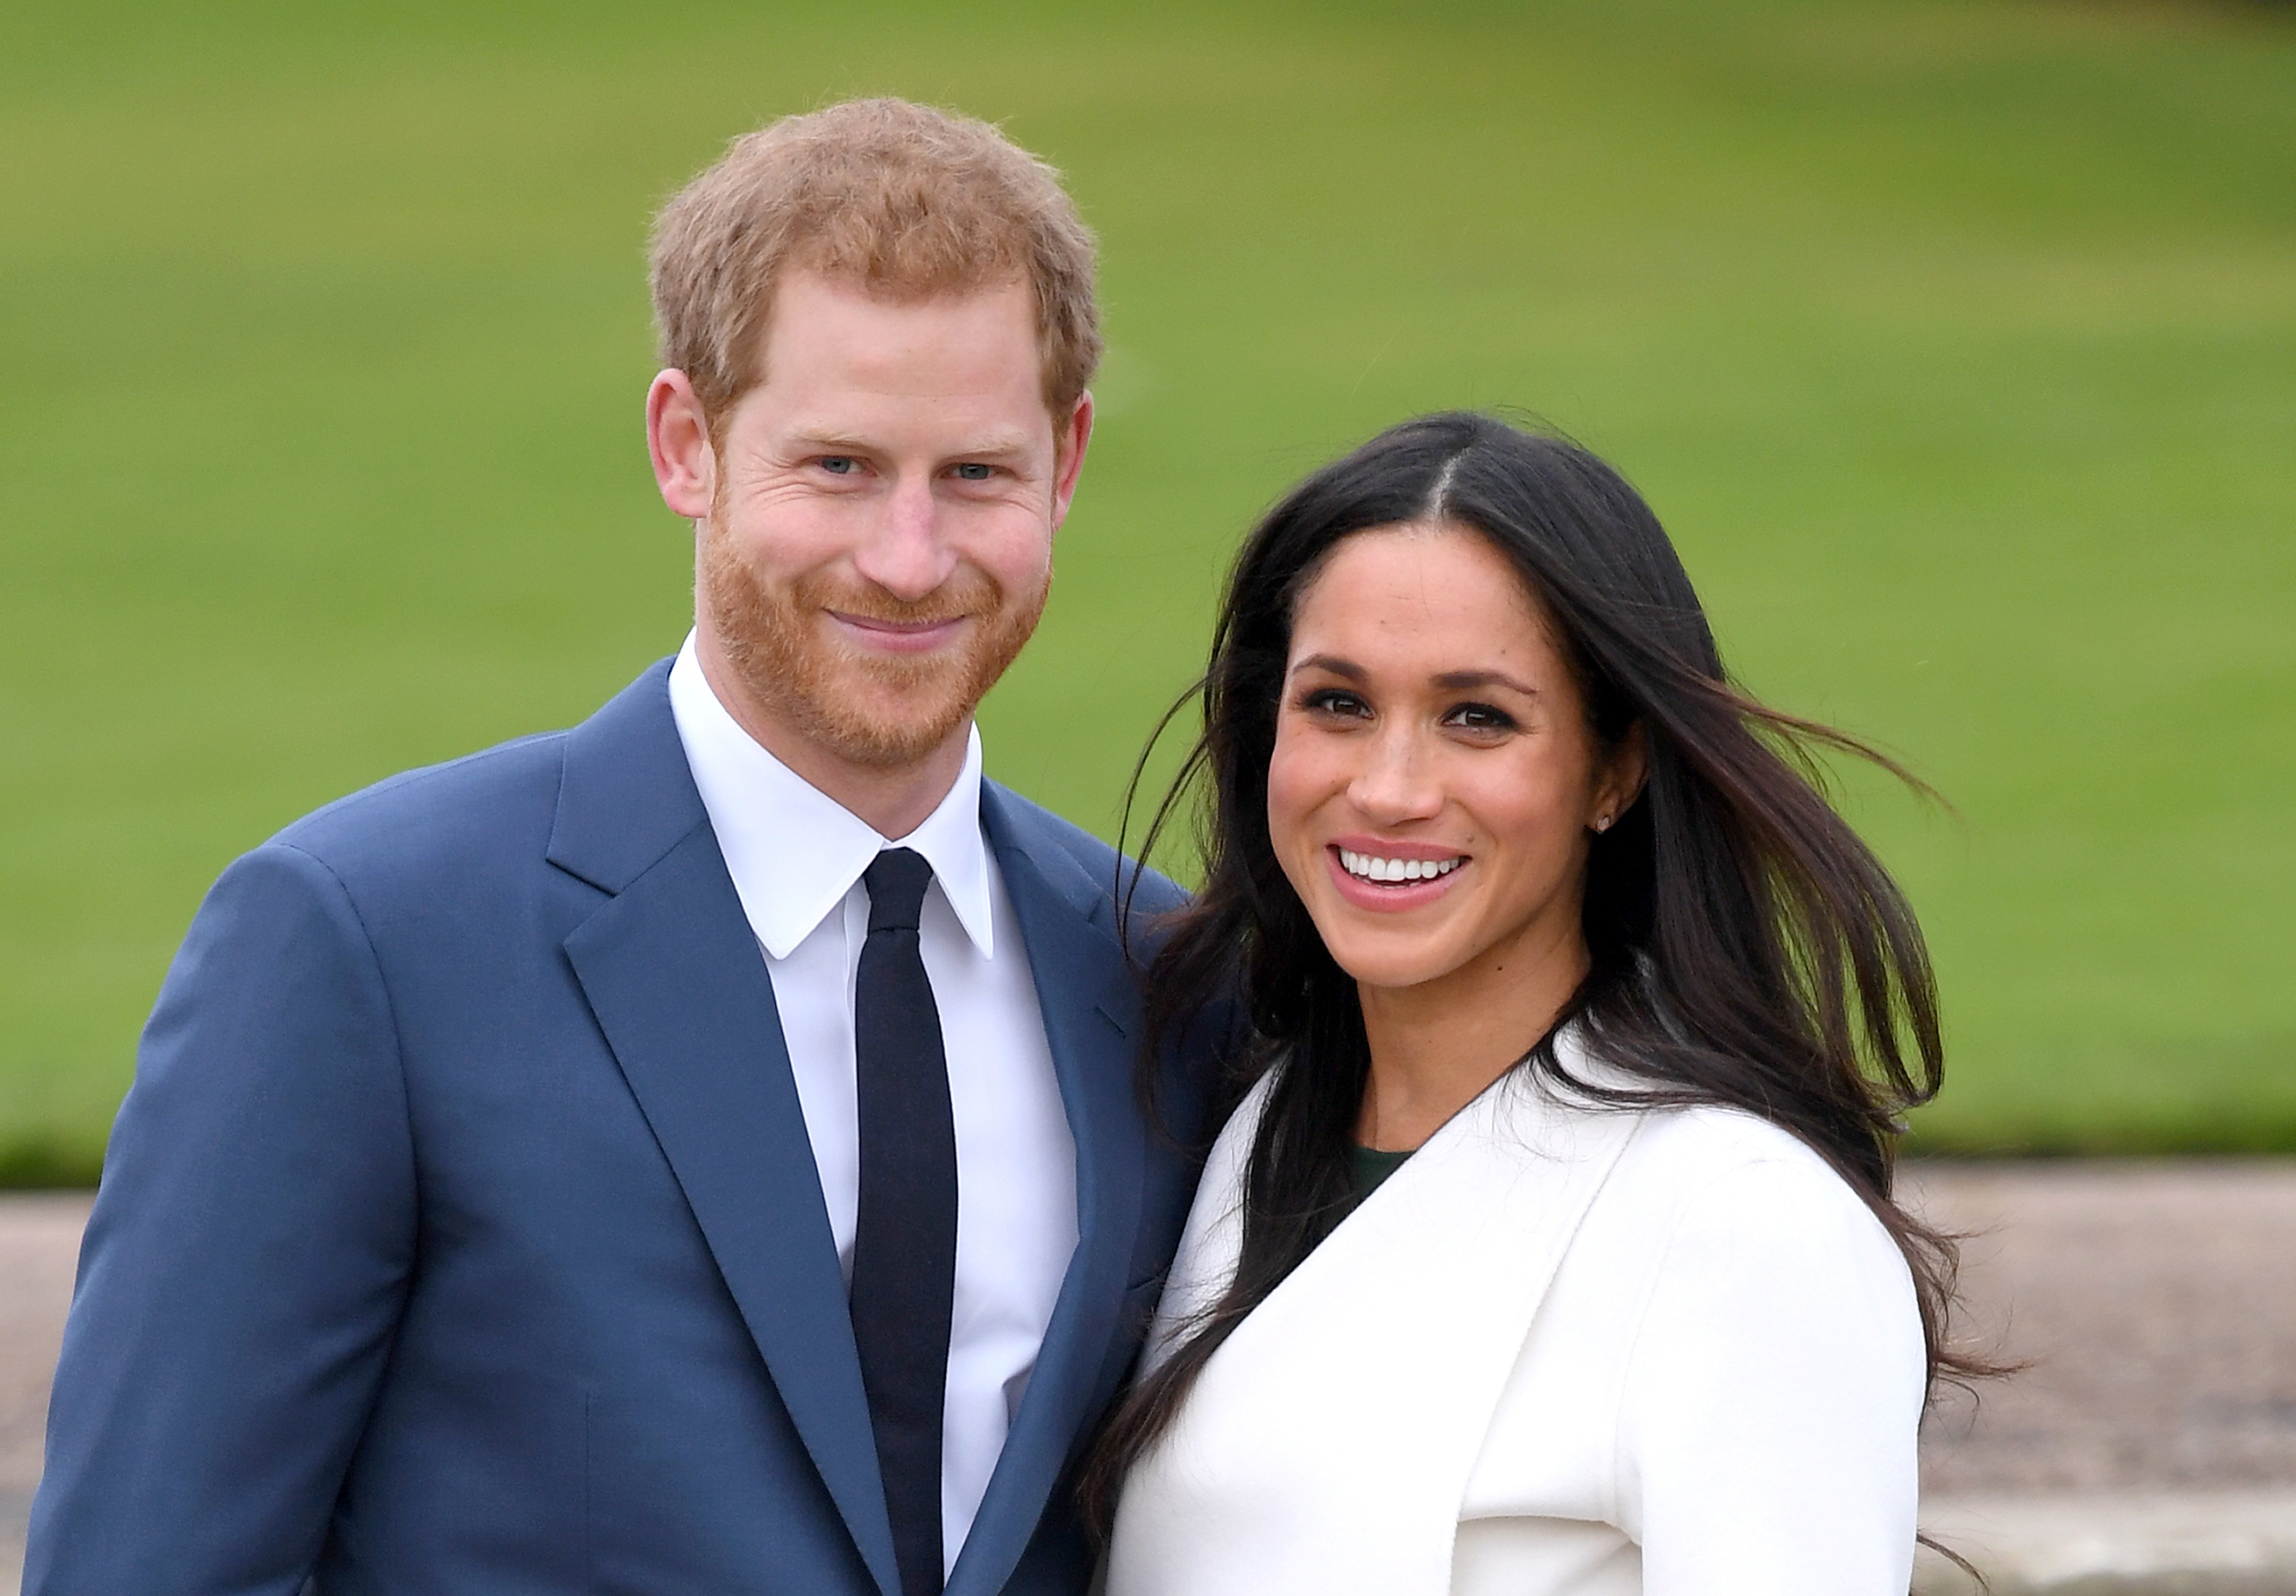 Prince Harry and Meghan Markle attend an official photocall to announce their engagement at The Sunken Gardens at Kensington Palace on November 27, 2017 in London, England ┃Source: Getty Images